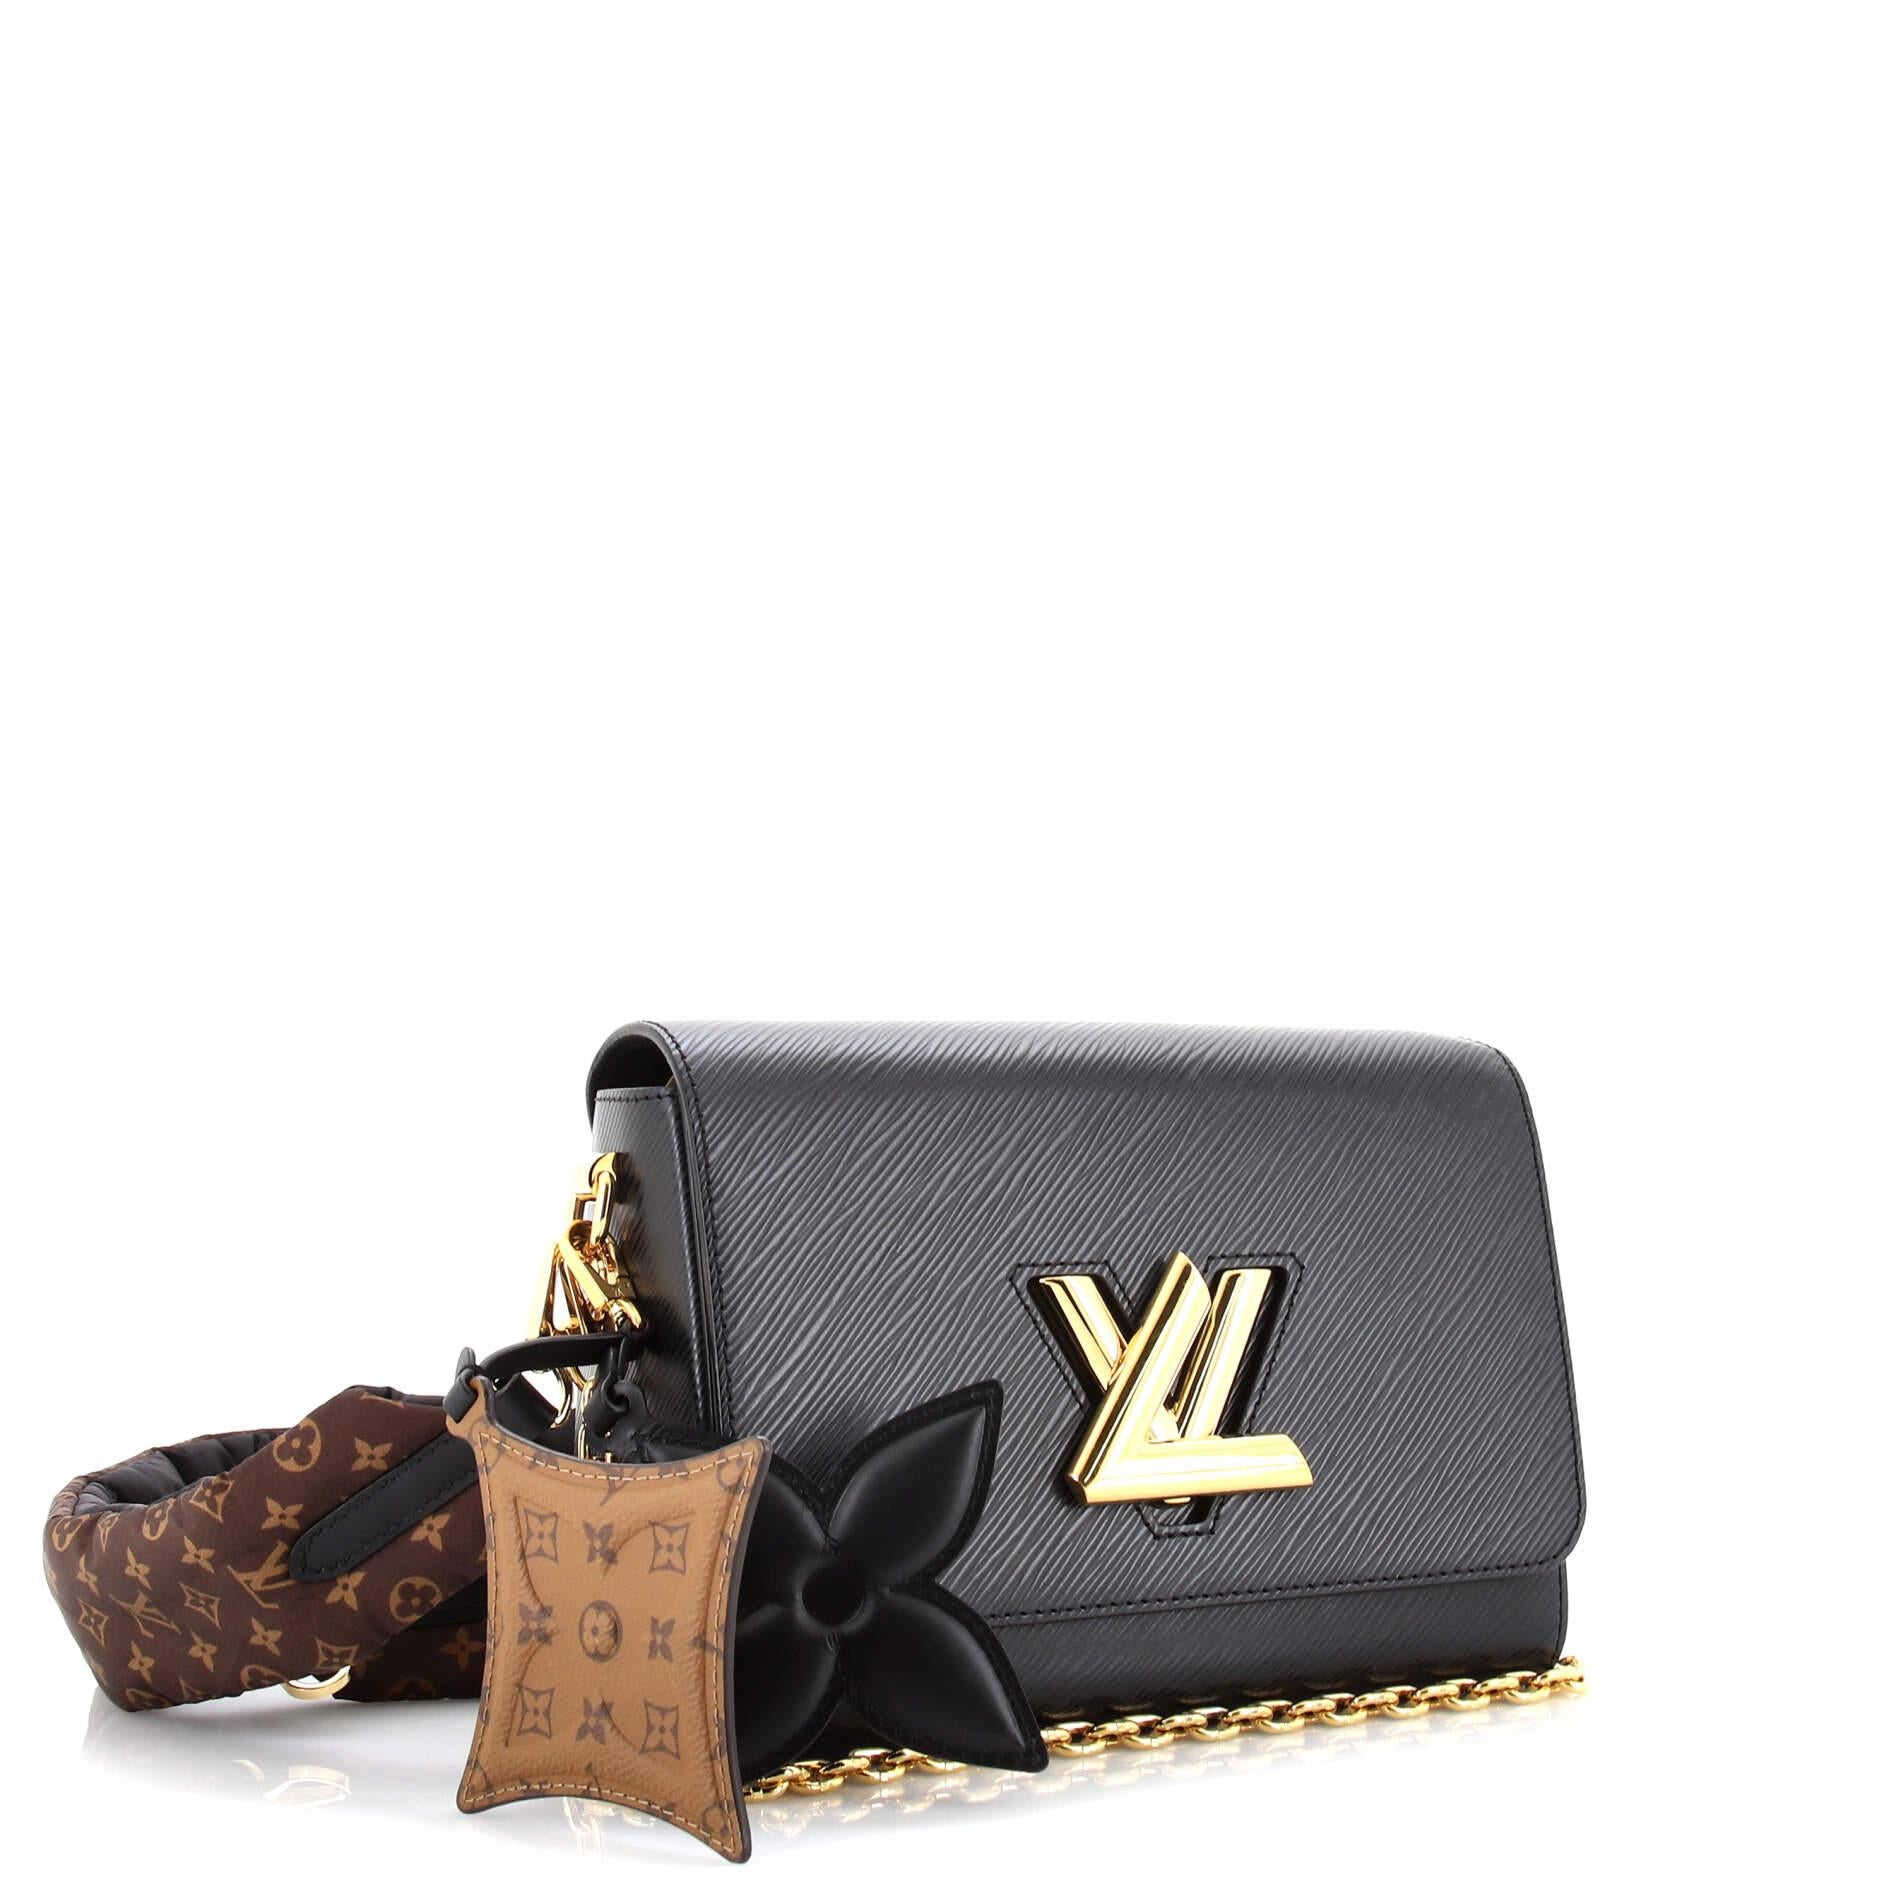 Louis Vuitton Pillow Bag - 15 For Sale on 1stDibs